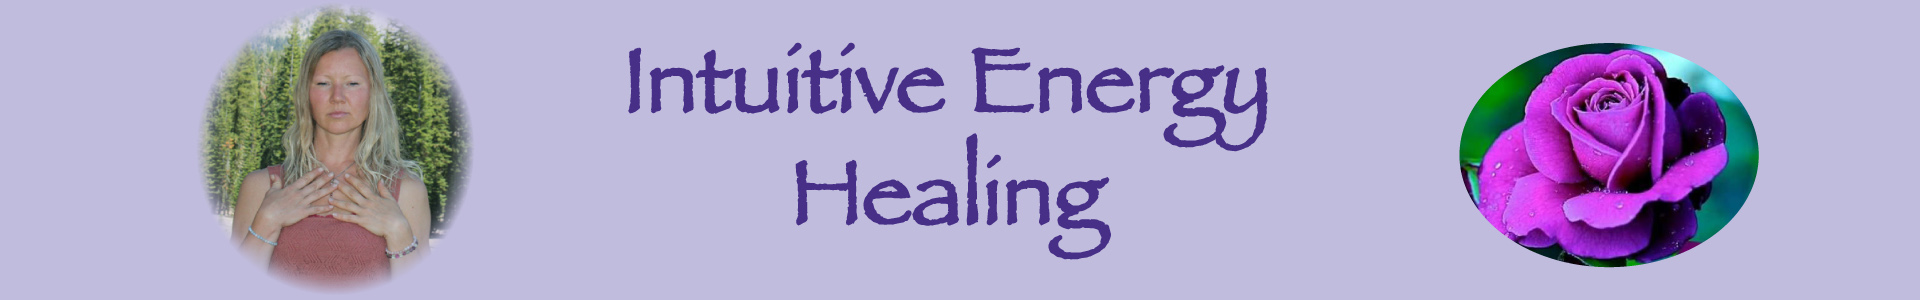 Violet Flame Healing & Guidance - Intuitive Energy Healing